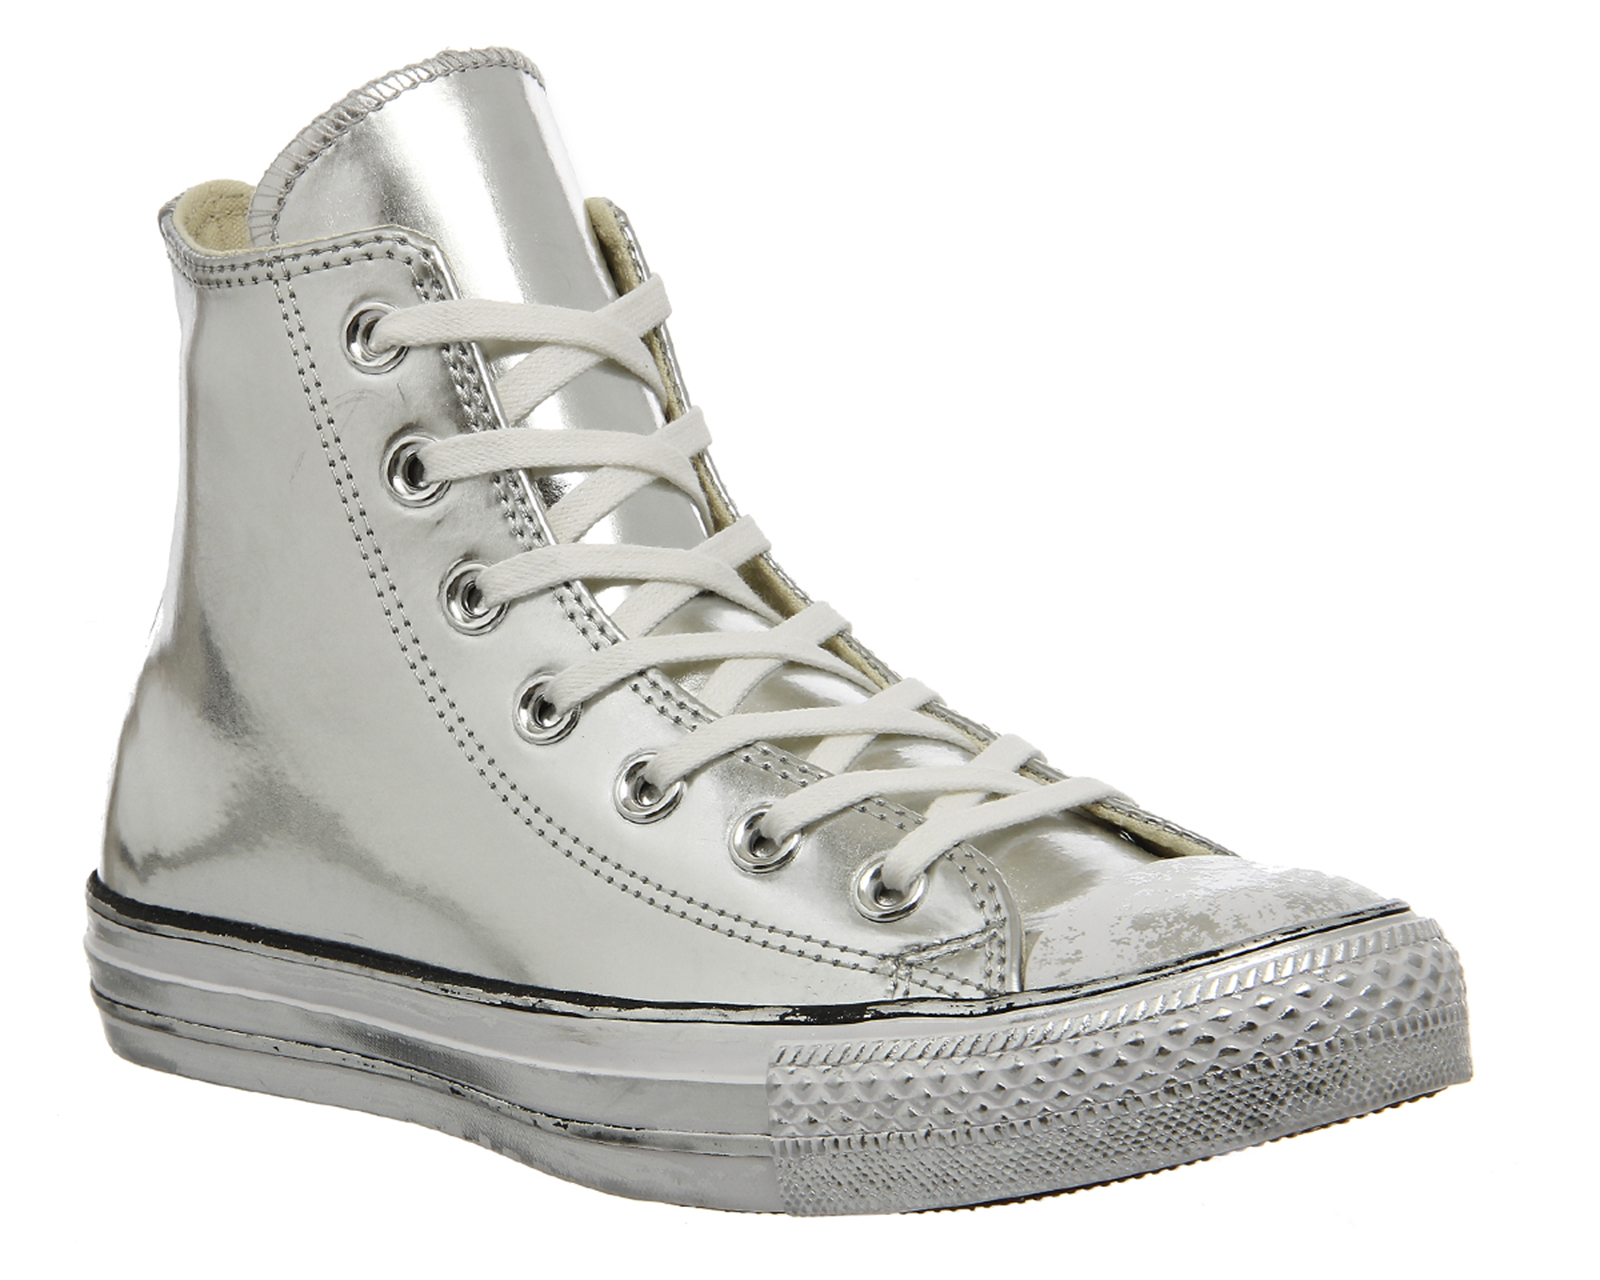 Converse All Star Hi Leather Trainers 